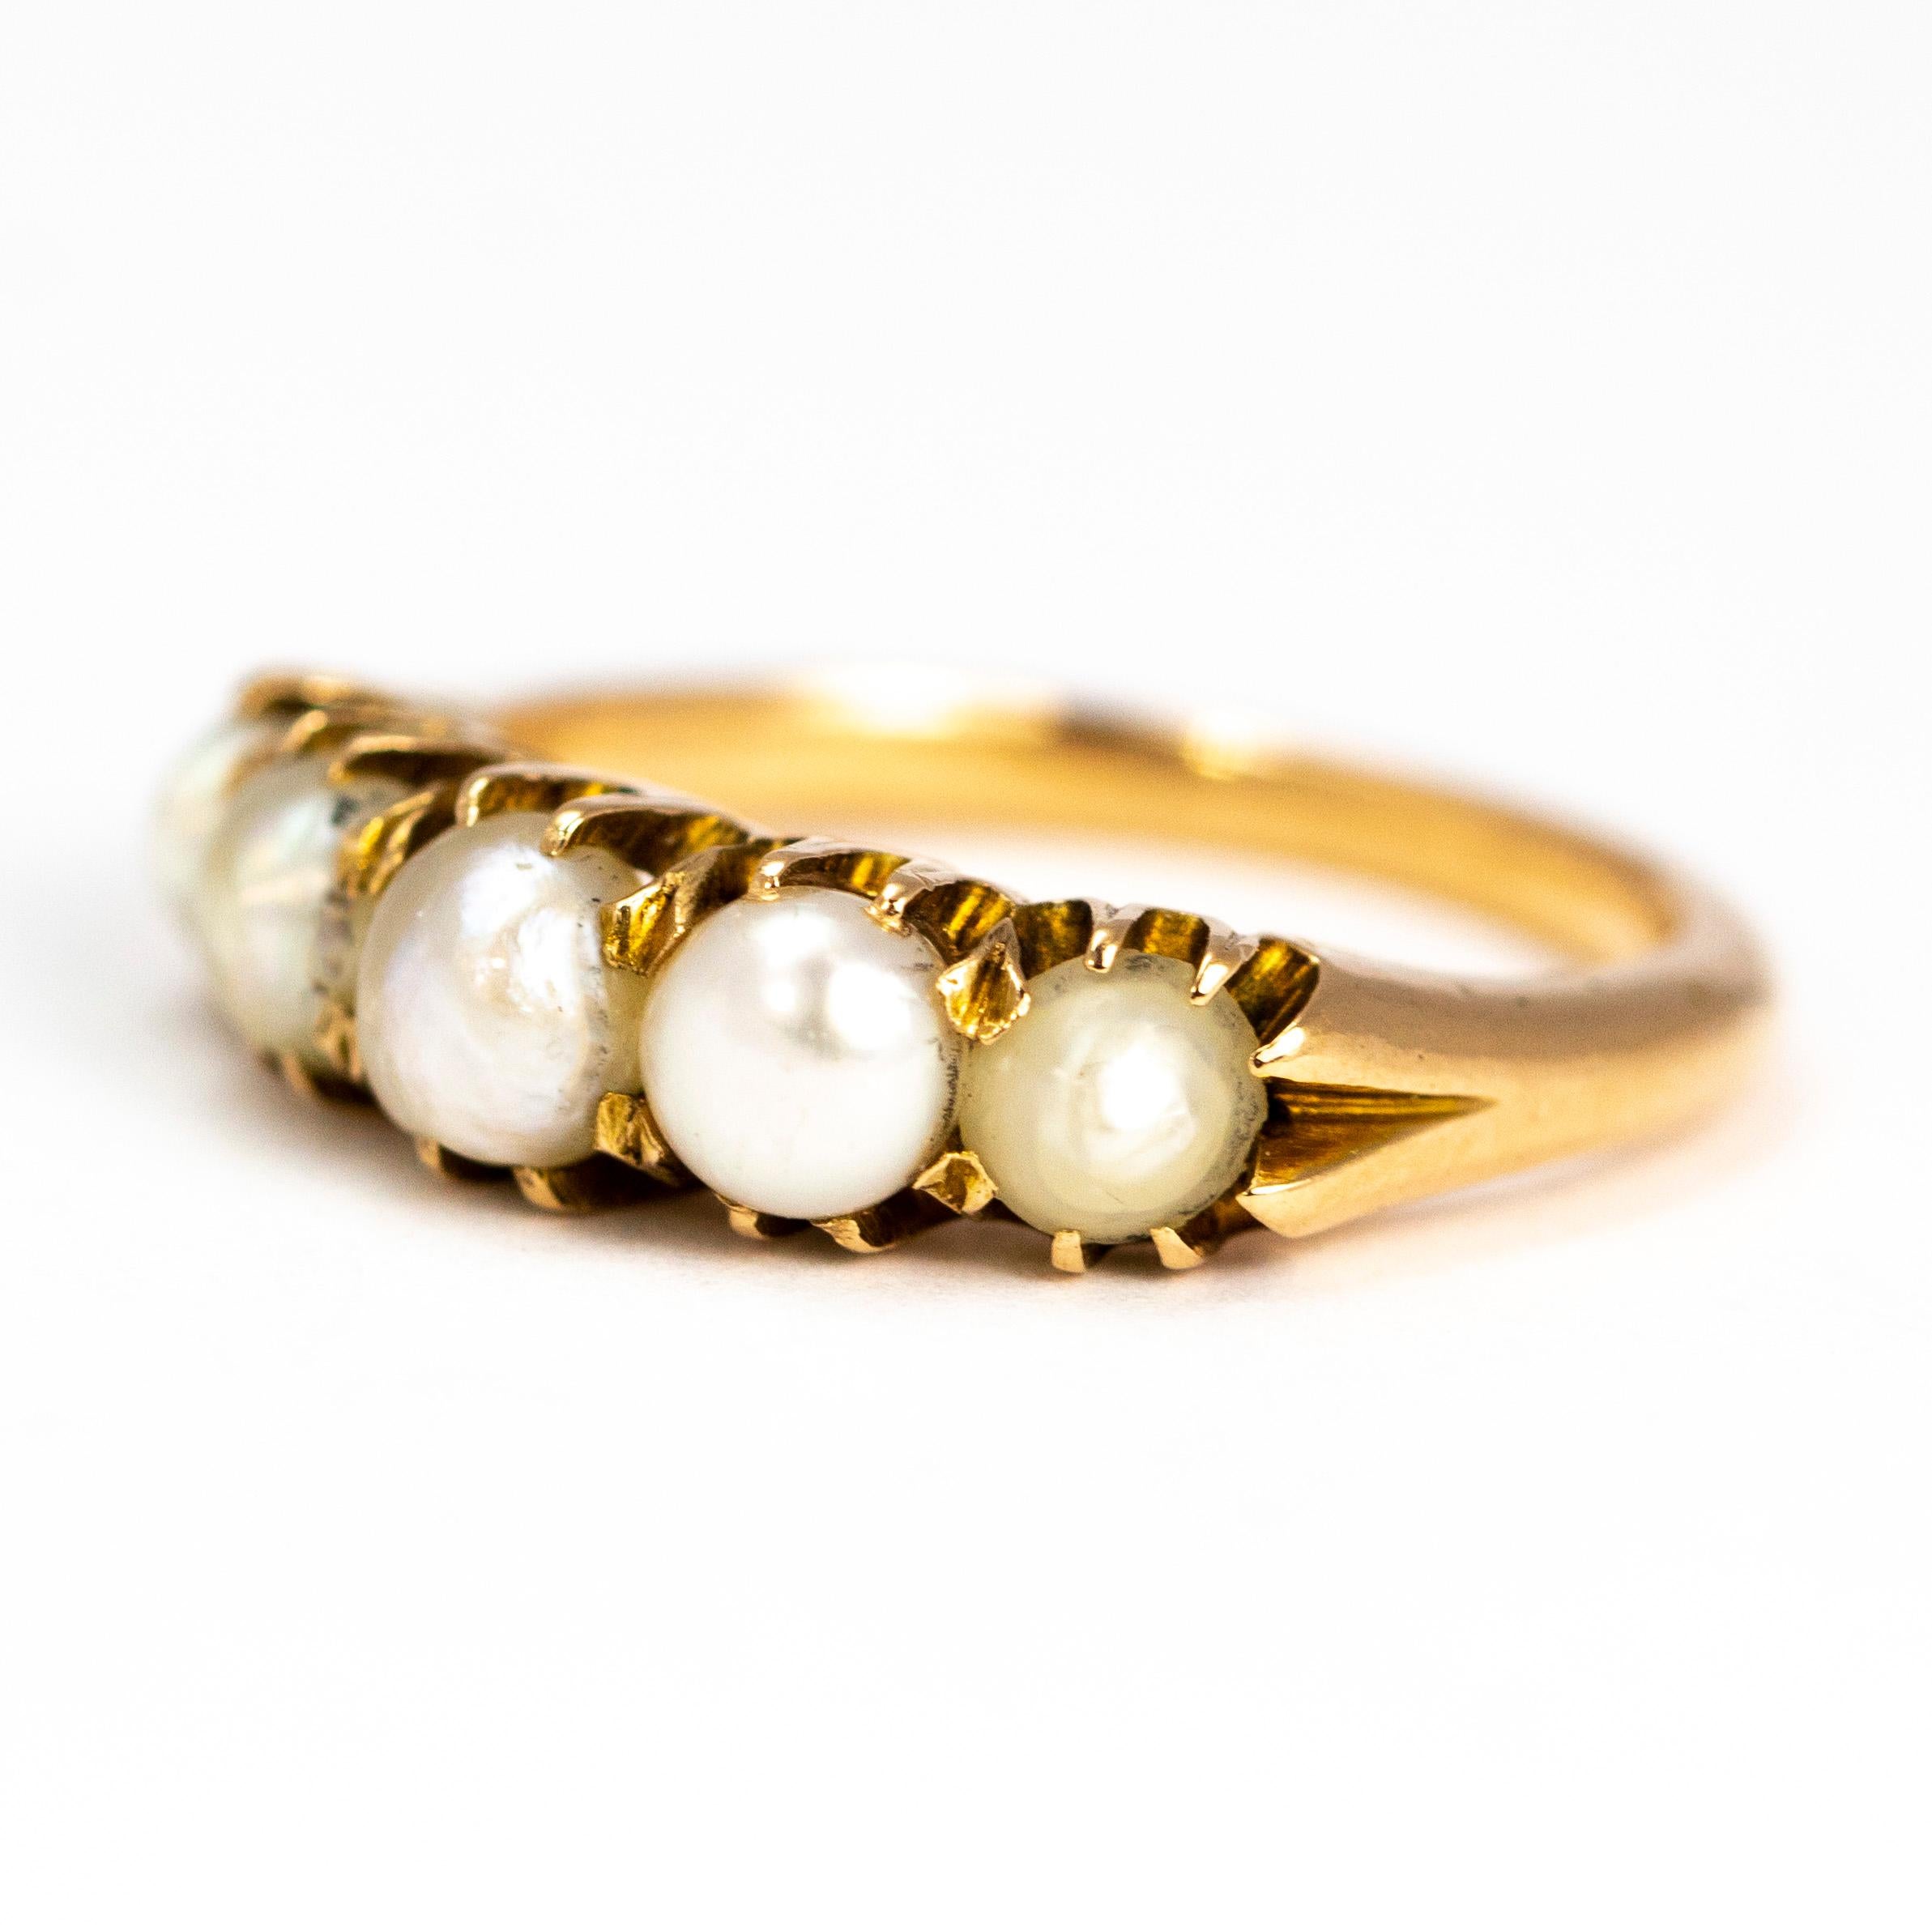 This pearl five stone ring has a chunky feel to it and is modelled in glossy 9carat gold. The pearls are se in simple claws.

Ring Size: L 1/2 or 6 
Band Width: 5mm

Weight: 4.7g